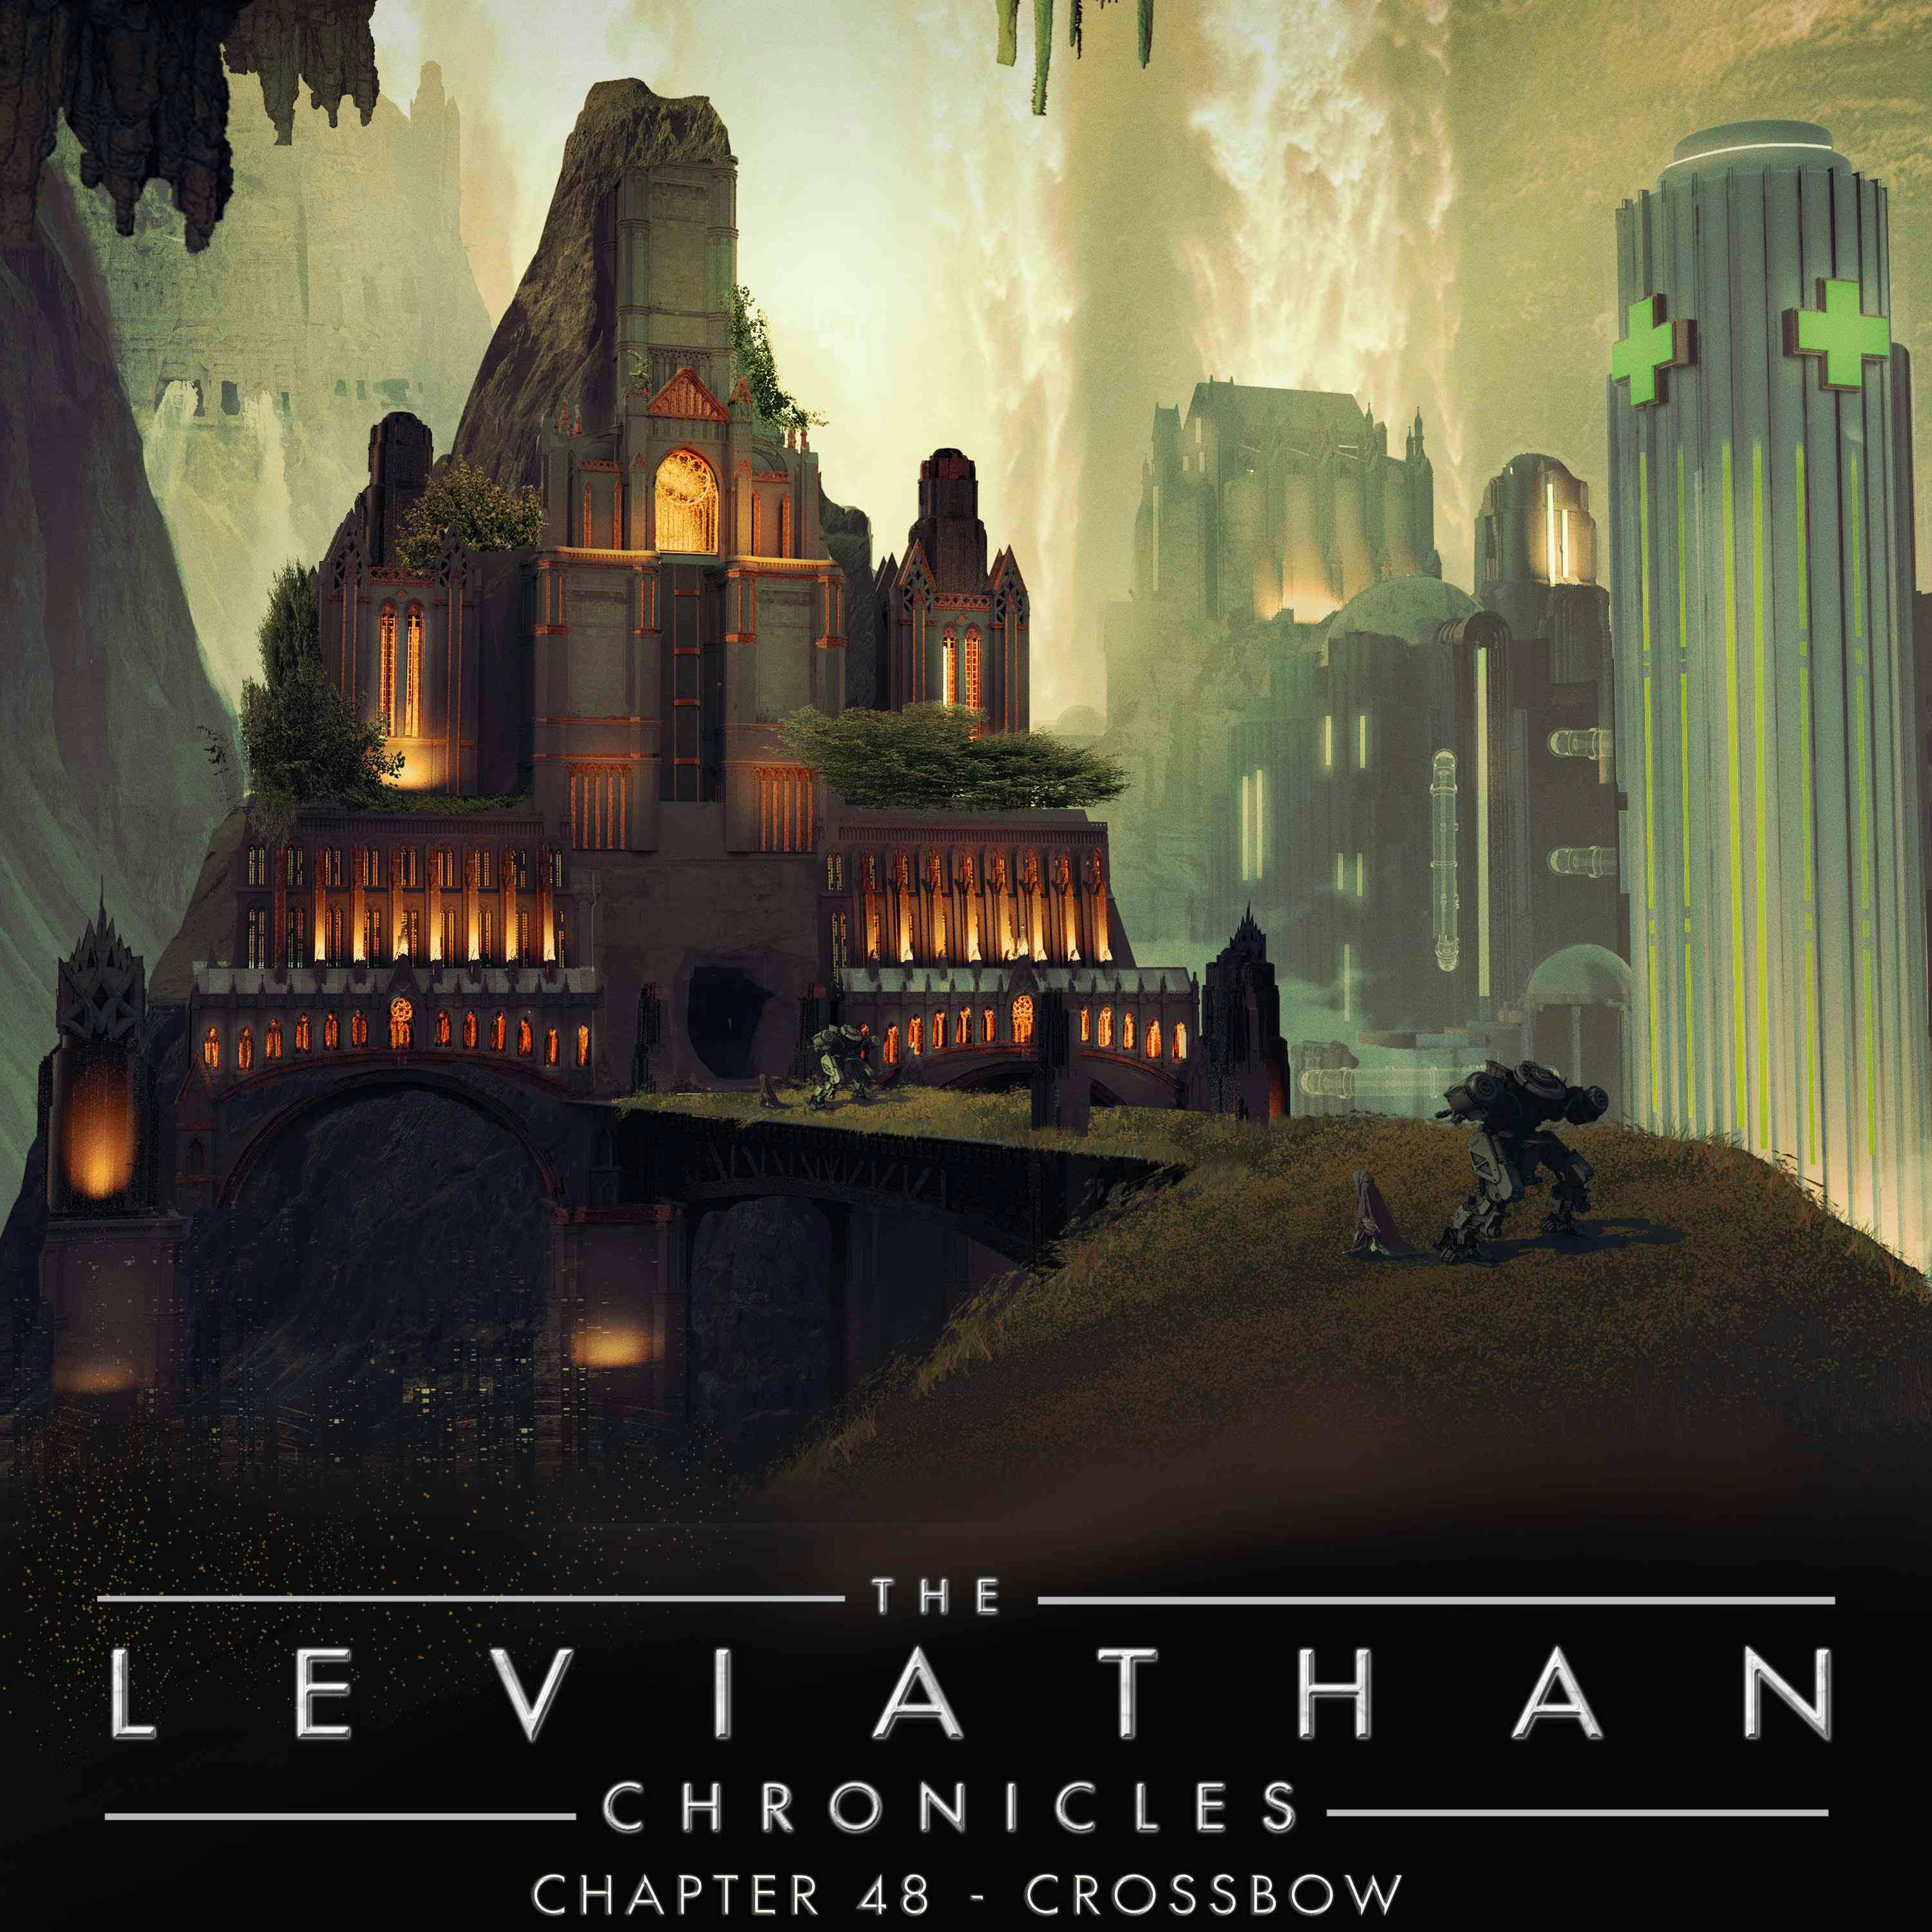 The Leviathan Chronicles | Chapter 48 - Crossbow